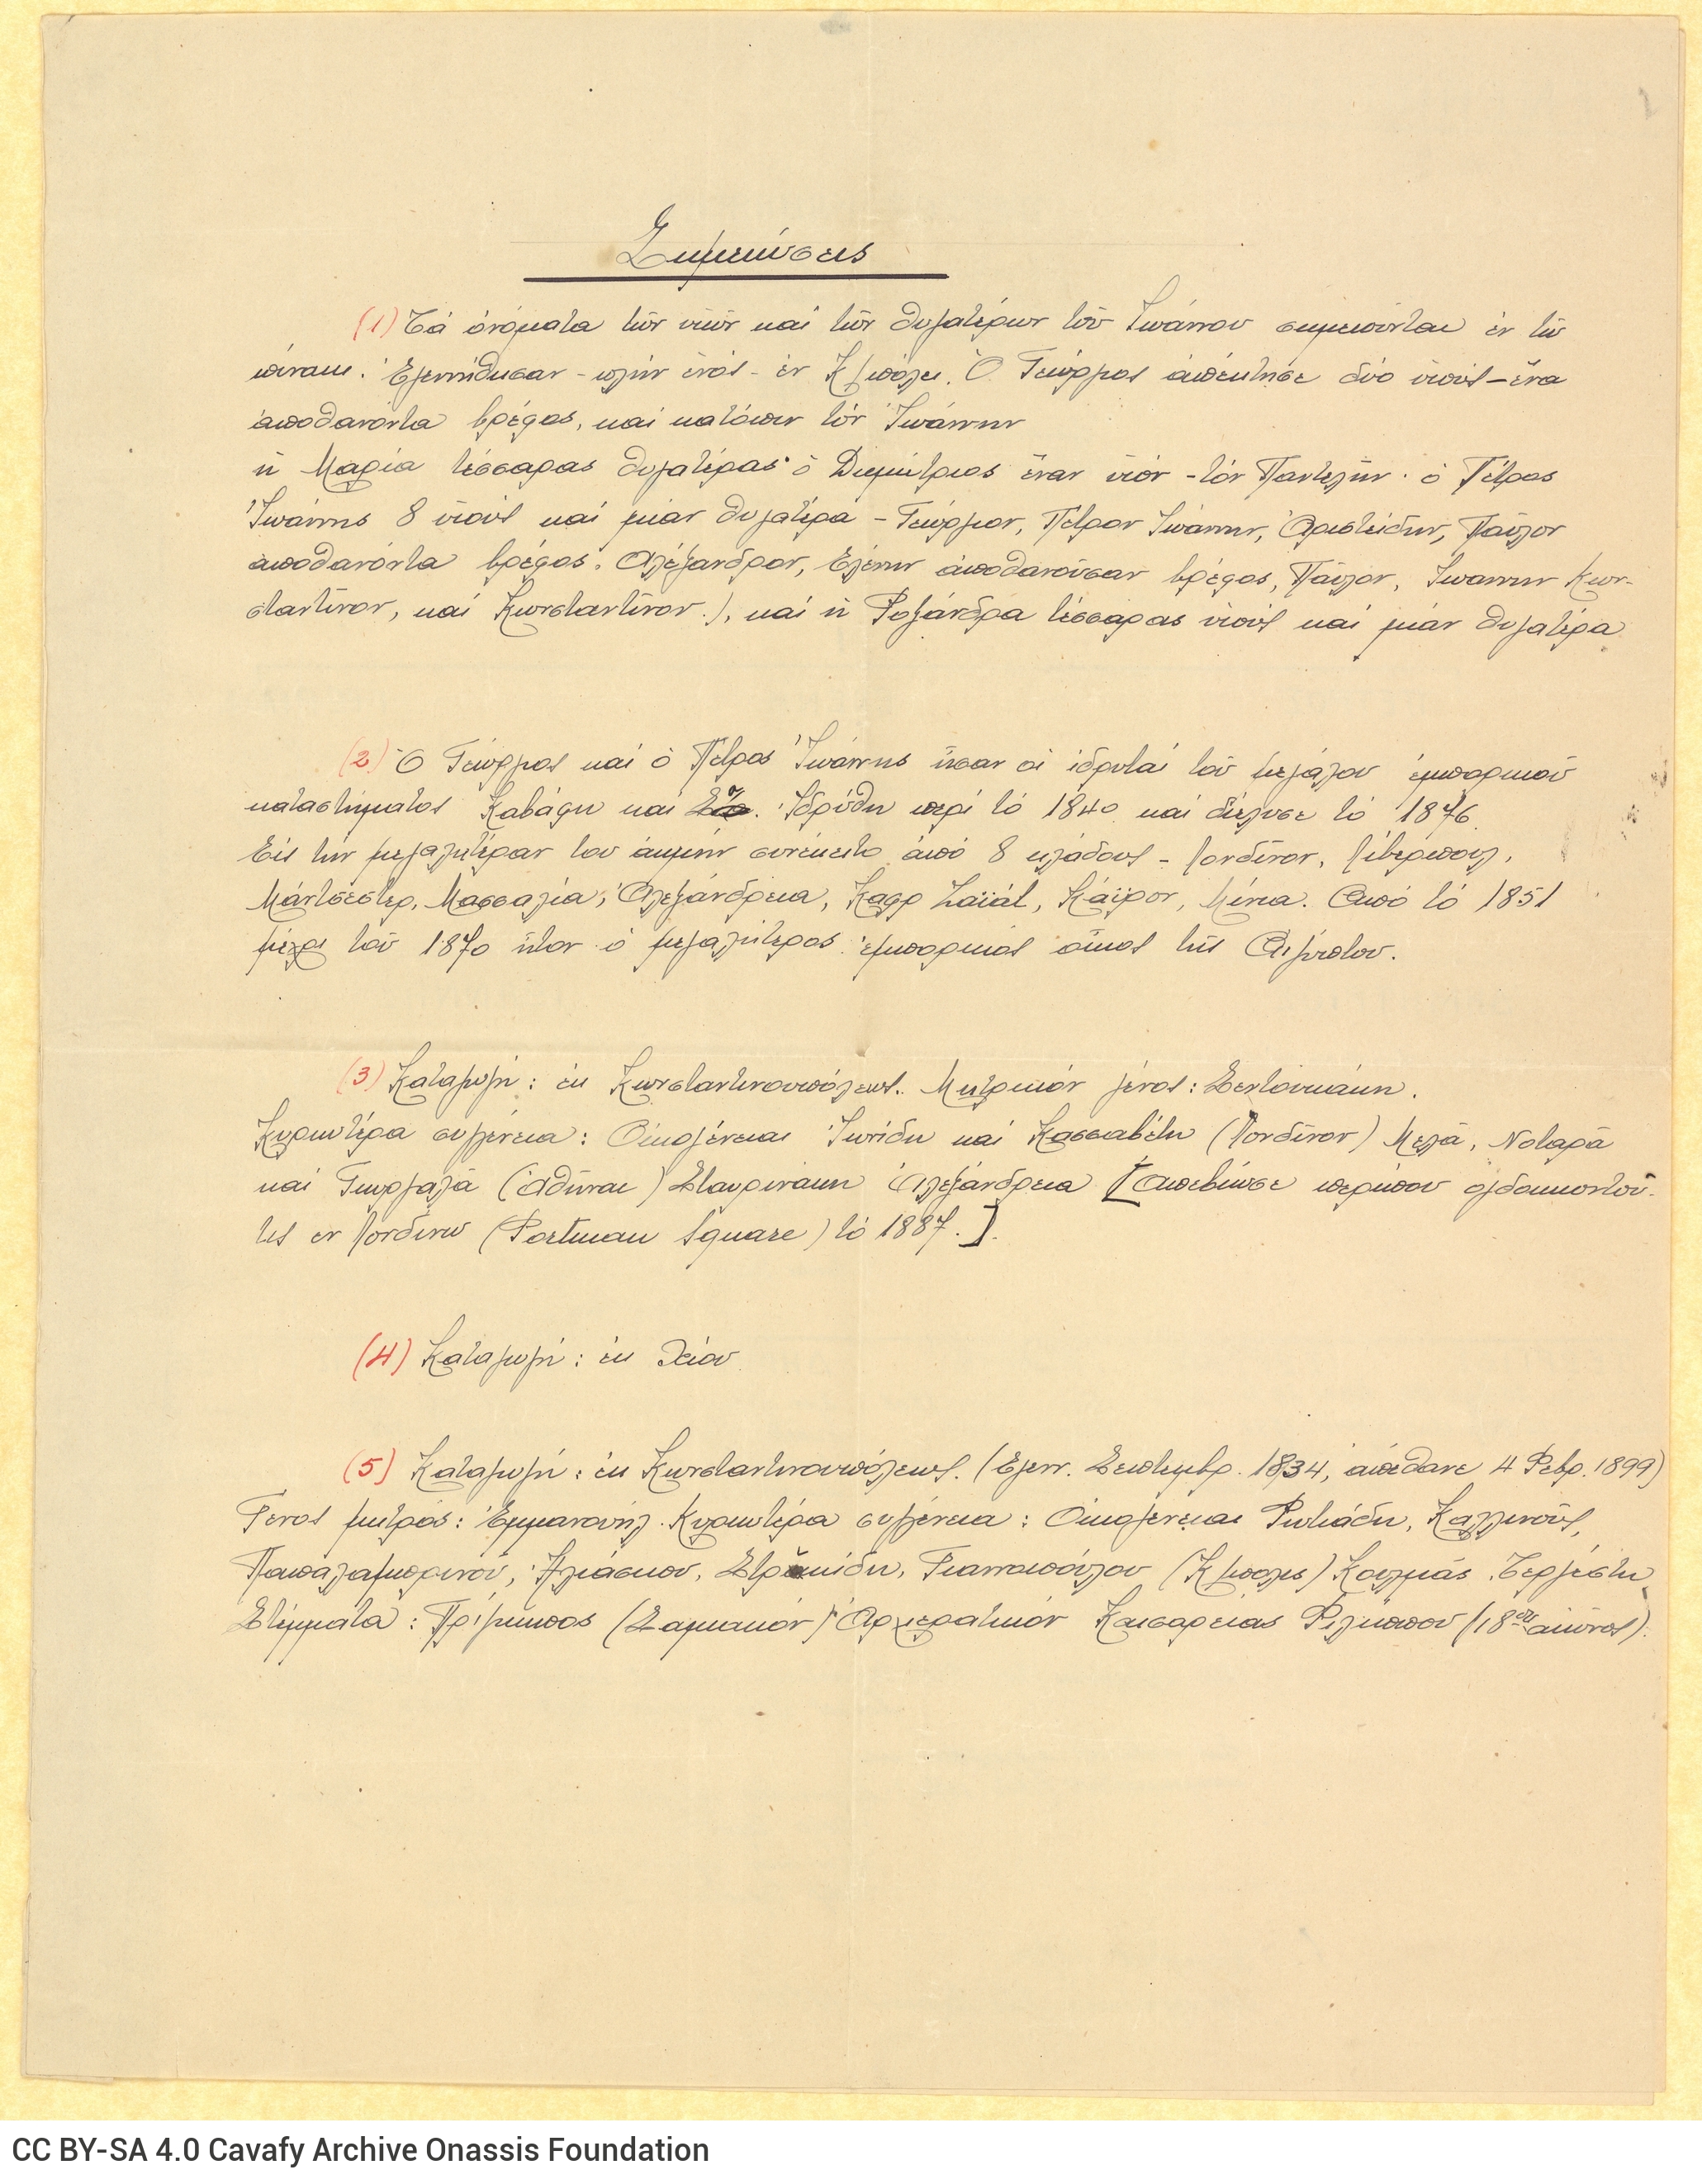 Manuscript on two large-size sheets affixed to one another so as to form a double sheet paper. It contains the Cavafy fami